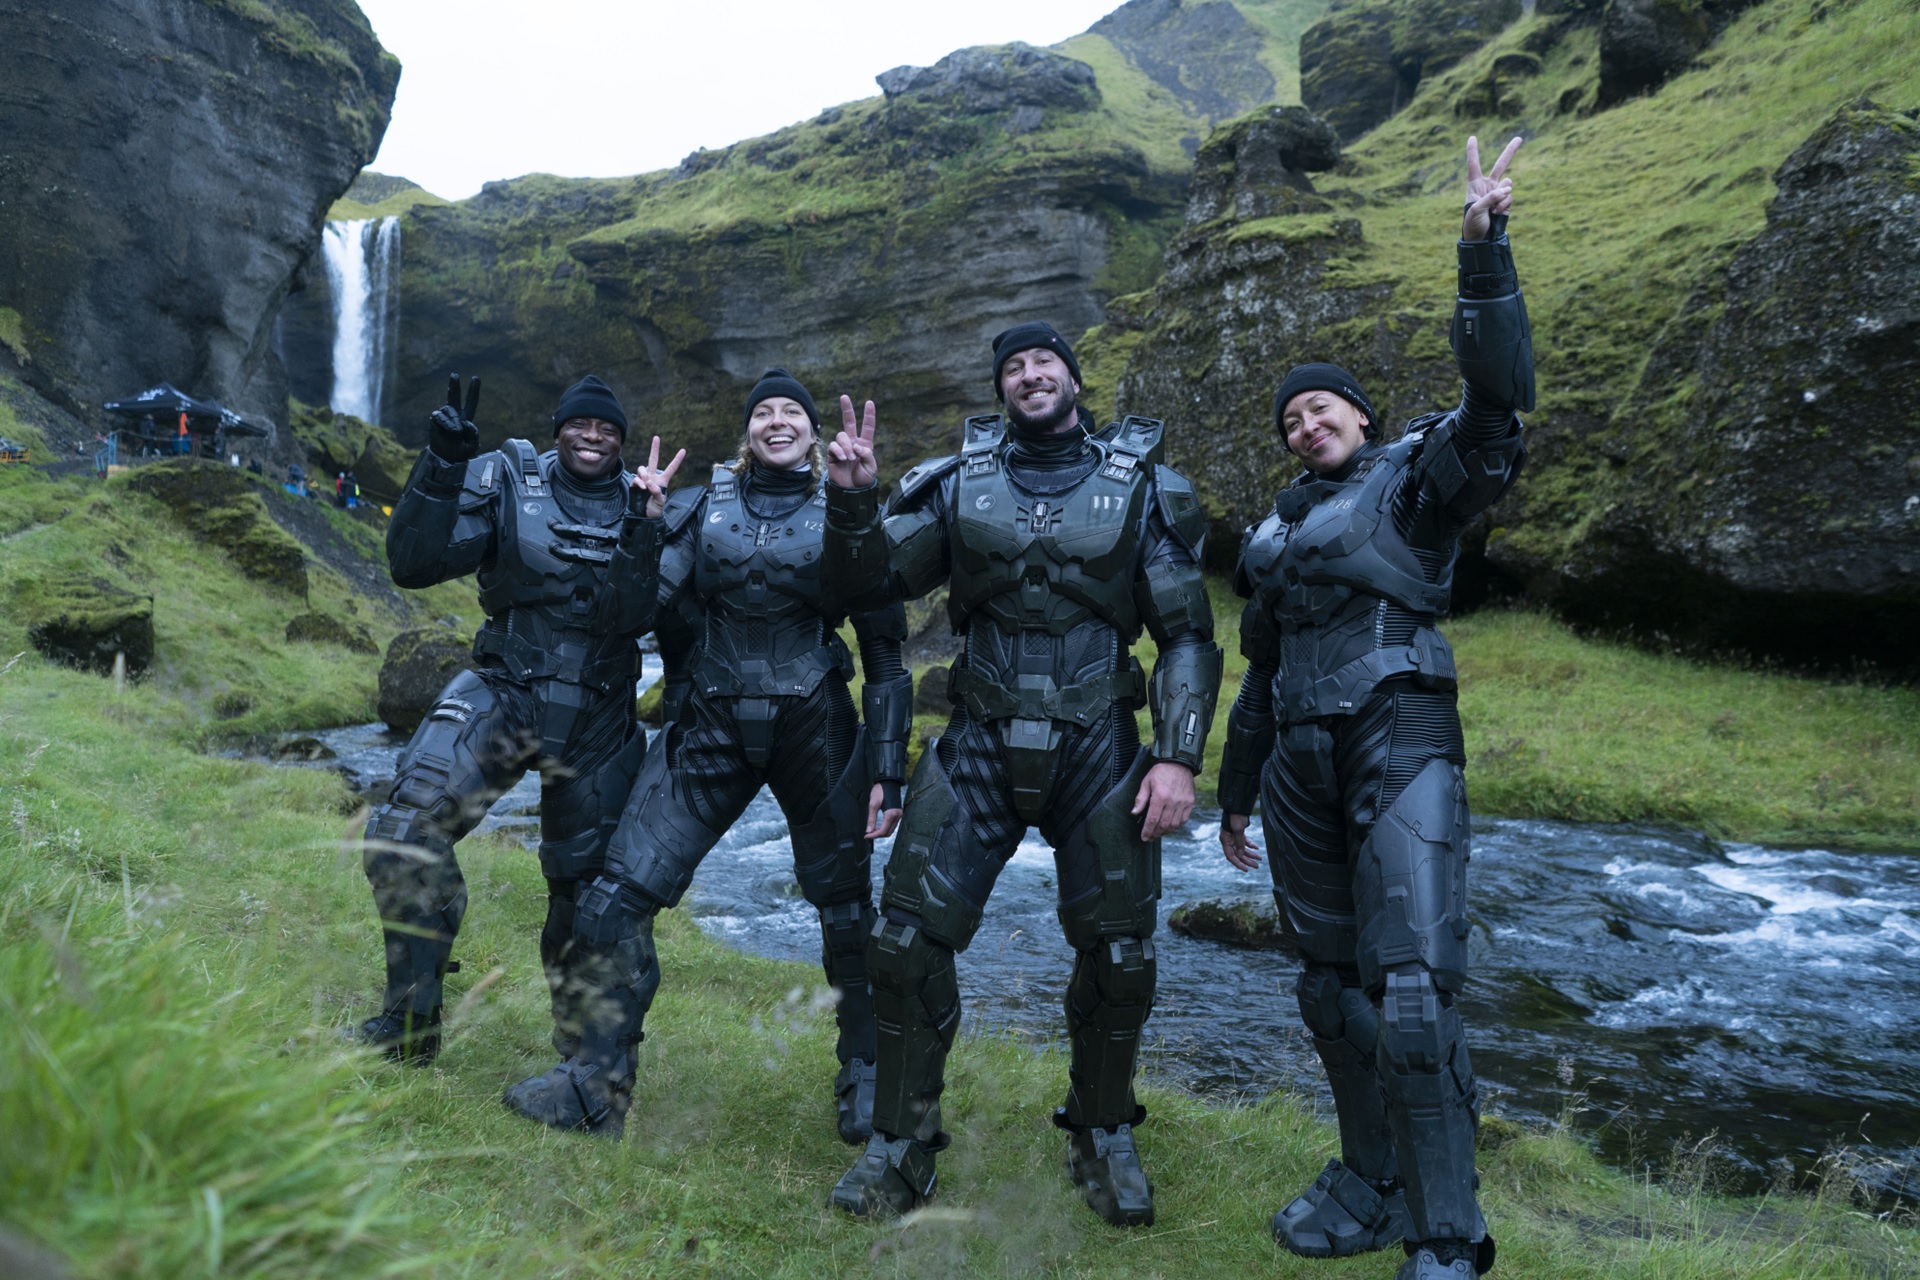 Season 2 production image for the Halo TV series showing the Spartans of Silver Team